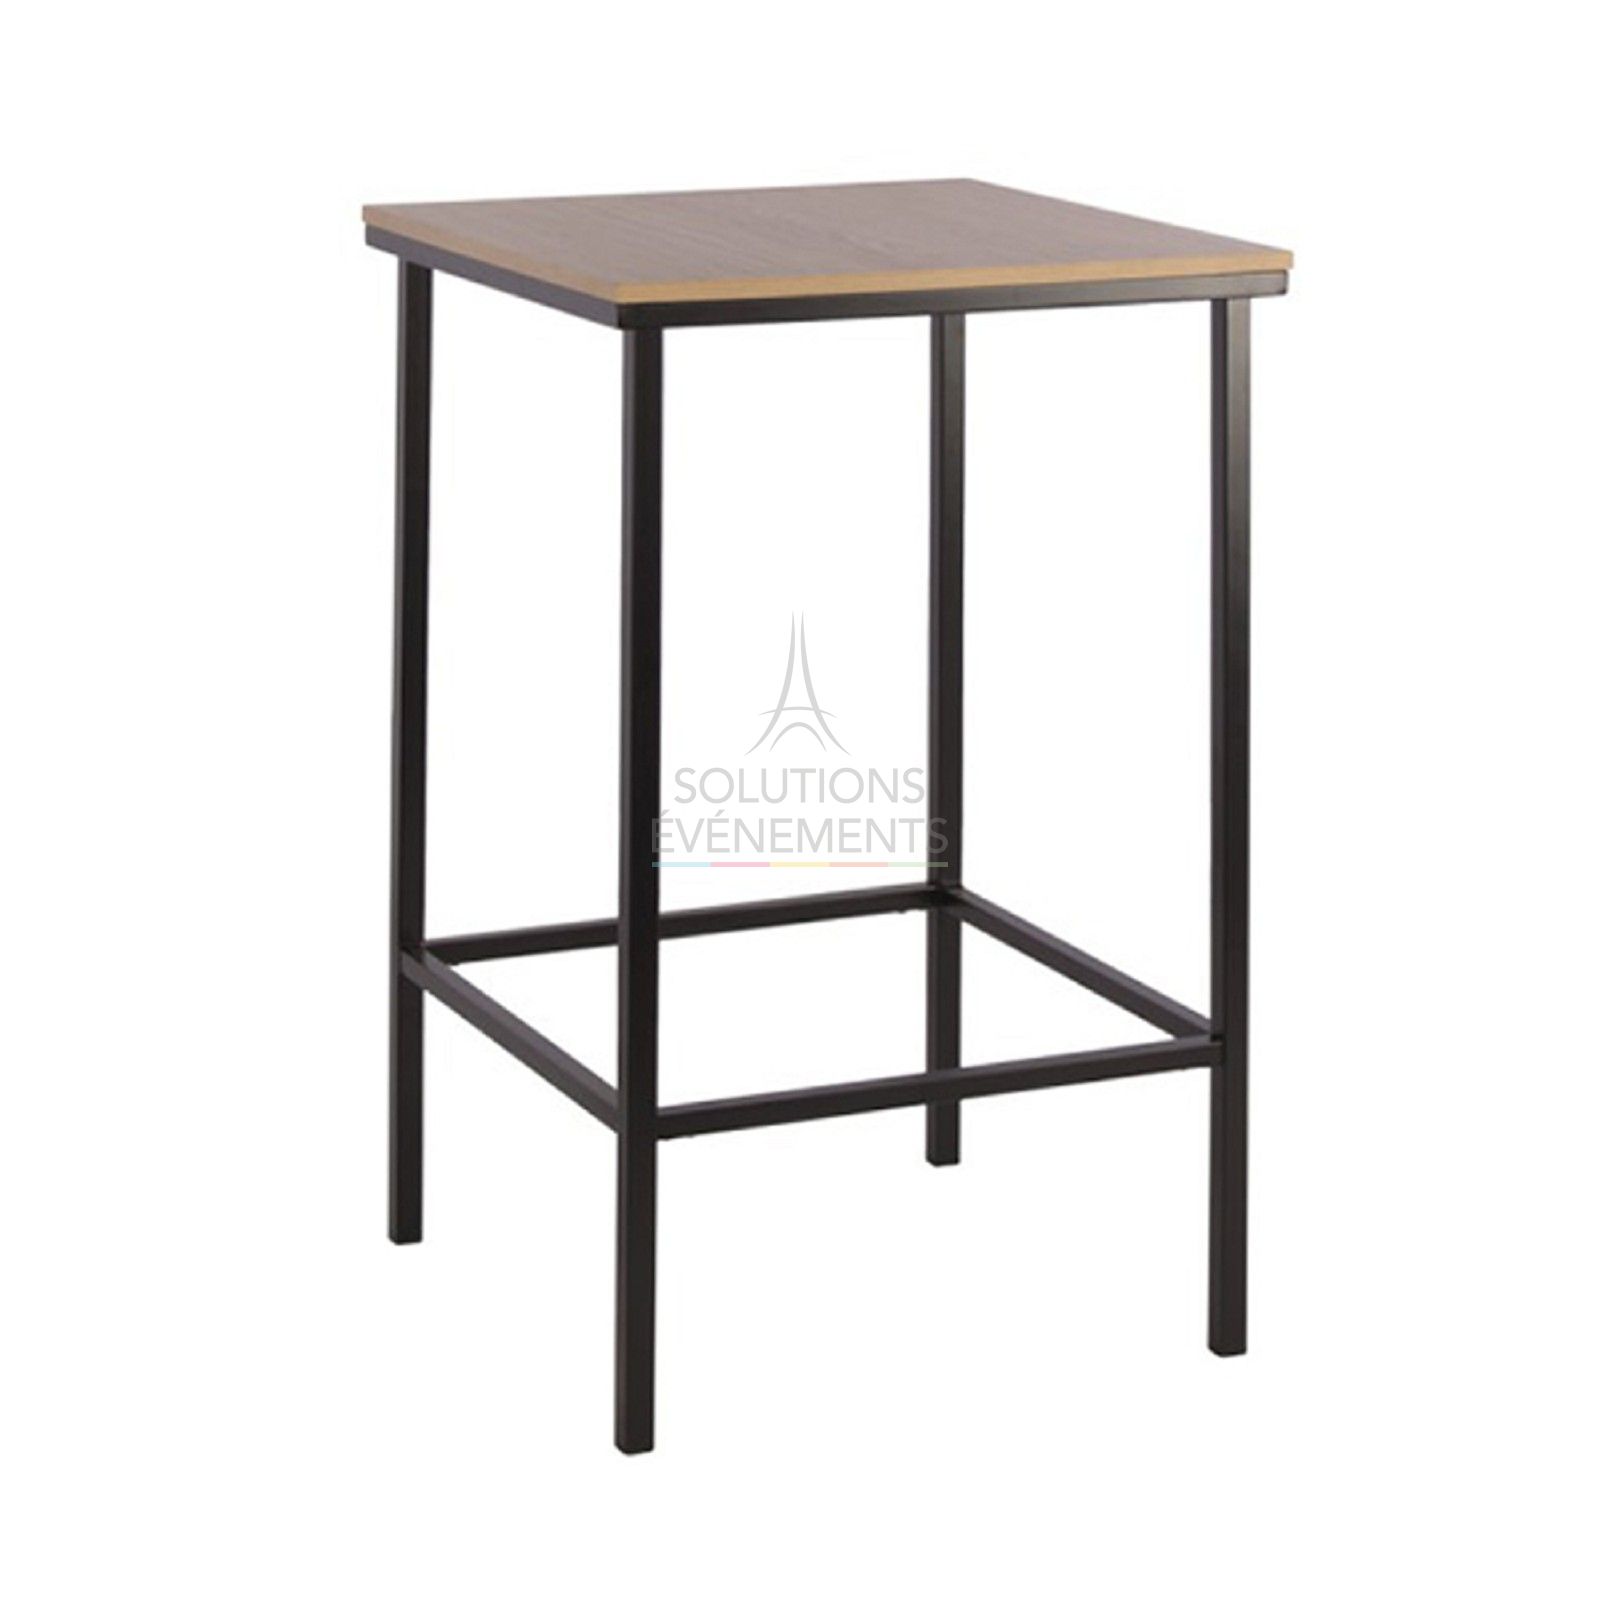 Rental of metal and wood standing tables